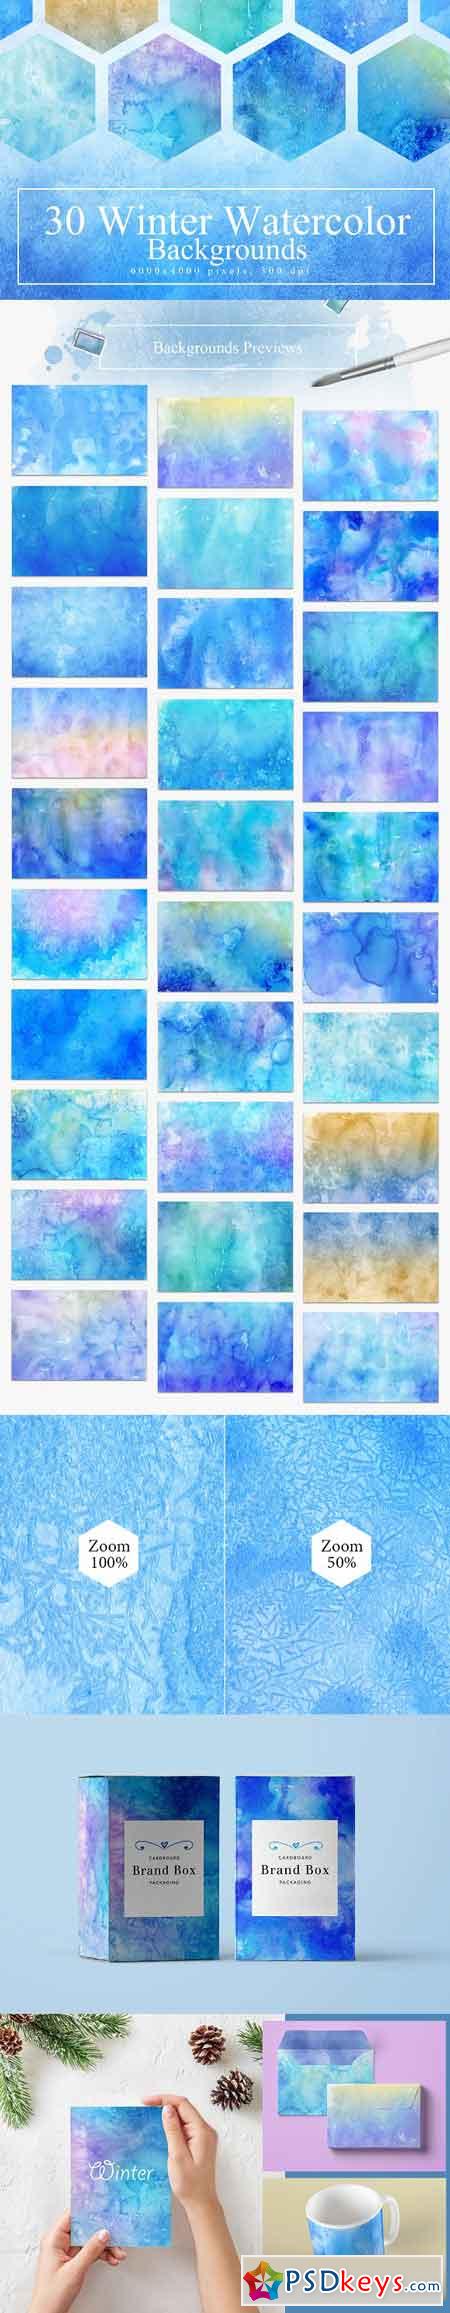 30 Winter Watercolor Backgrounds 2301265